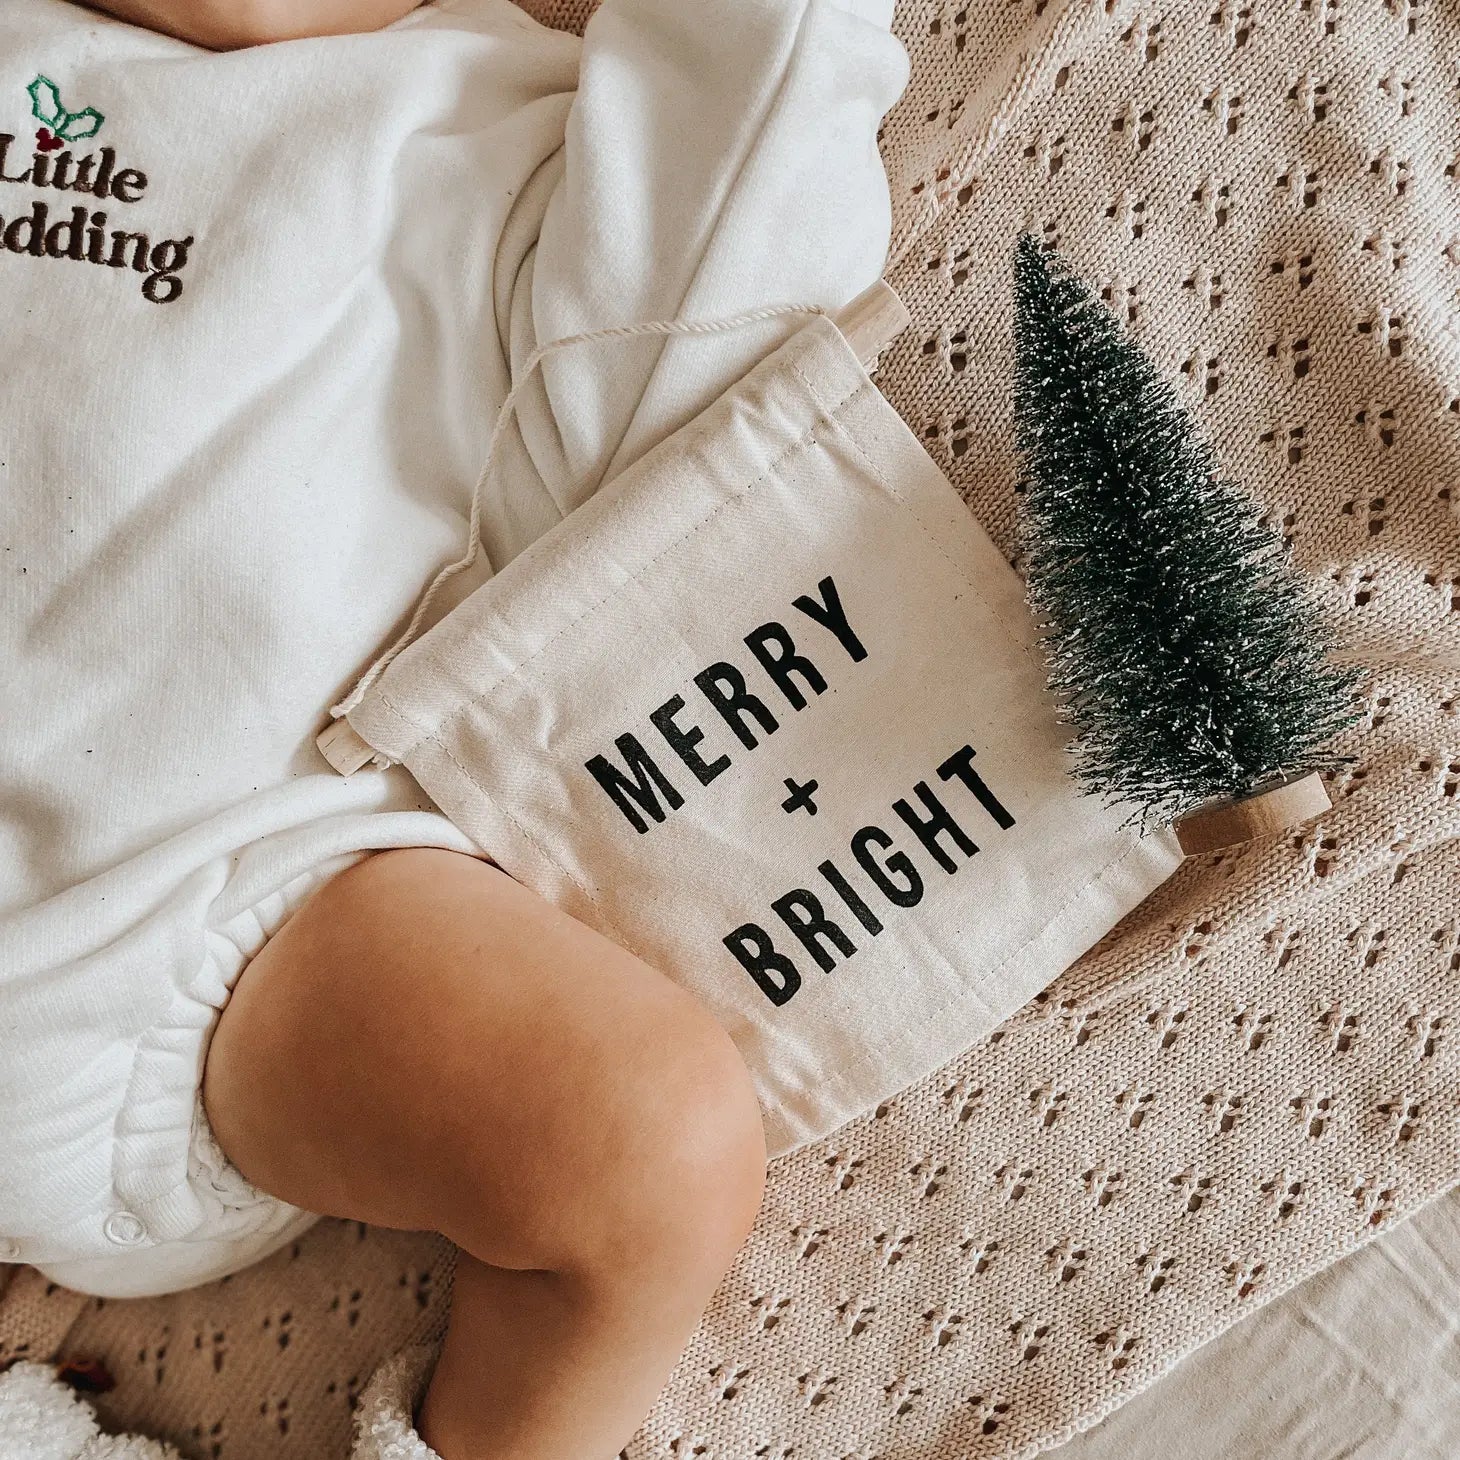 Merry and Bright hanging sign